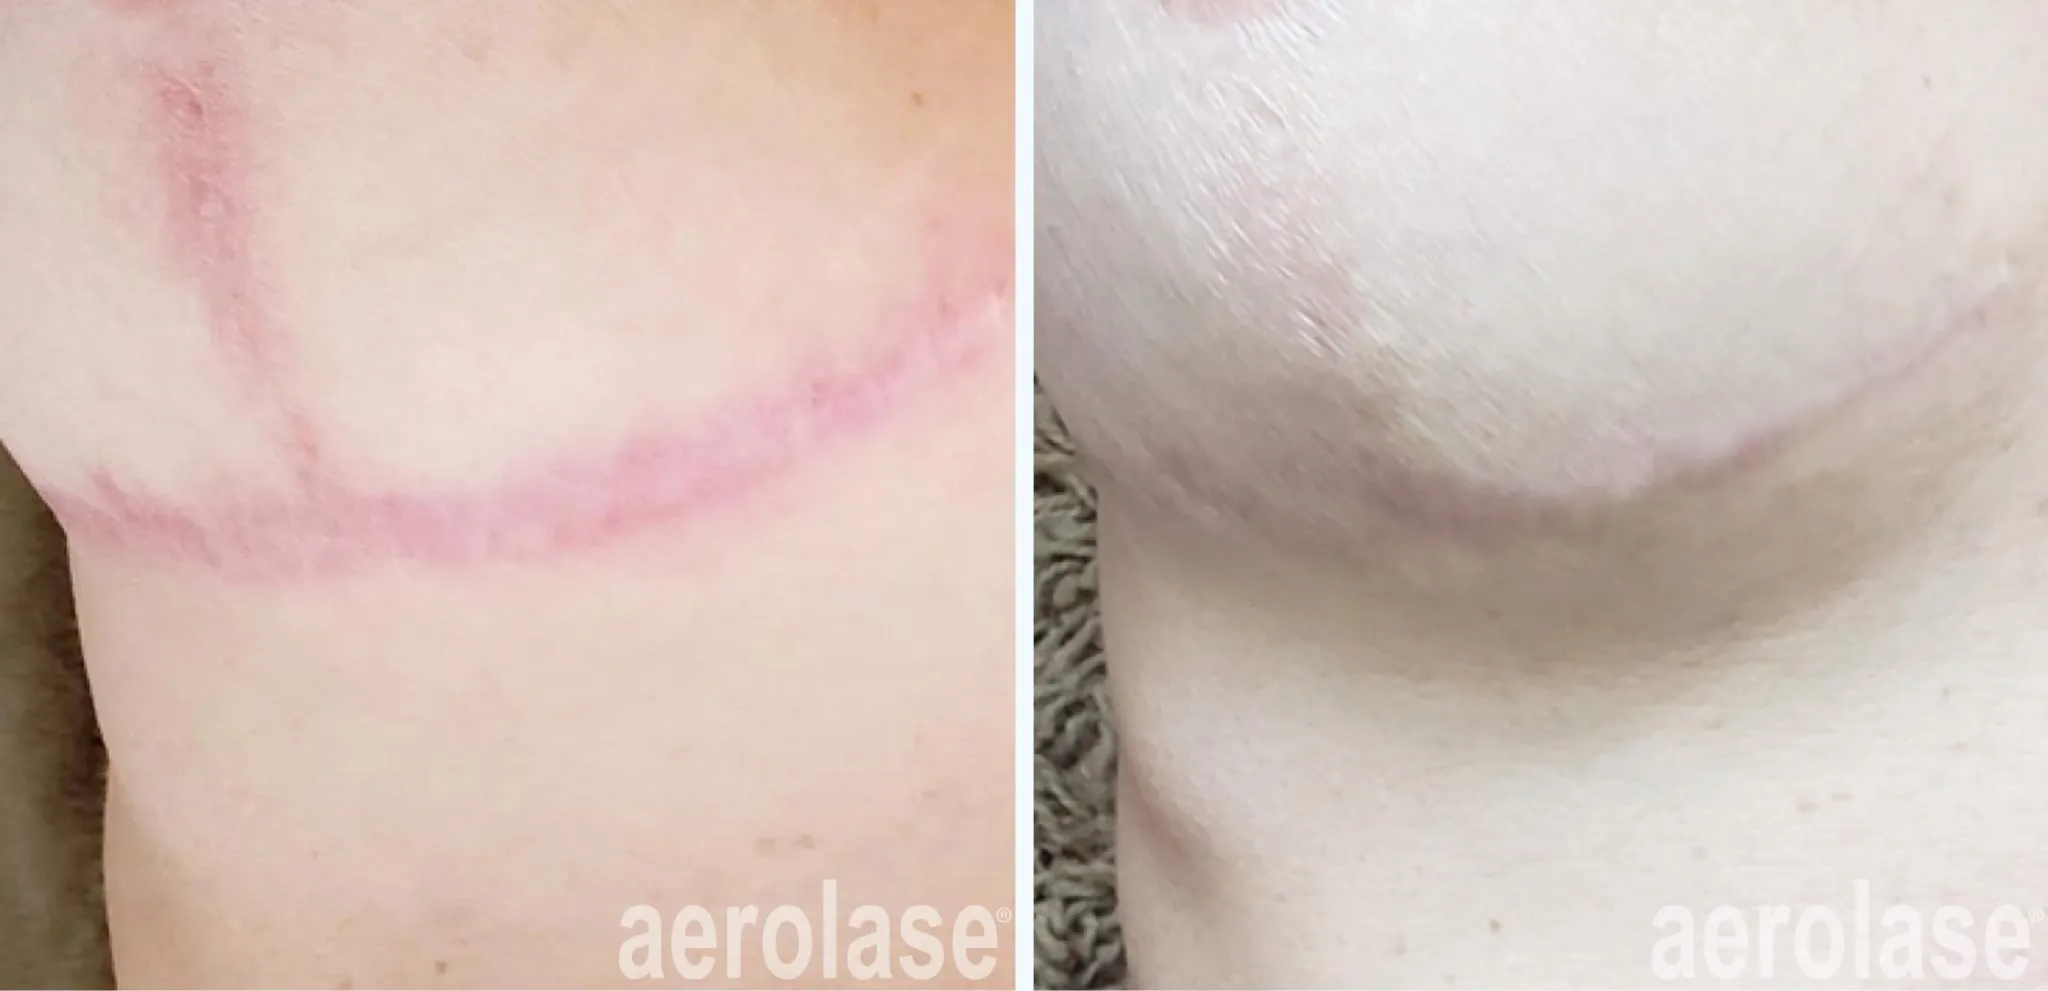 post-surgical-scar-2-before-and-after